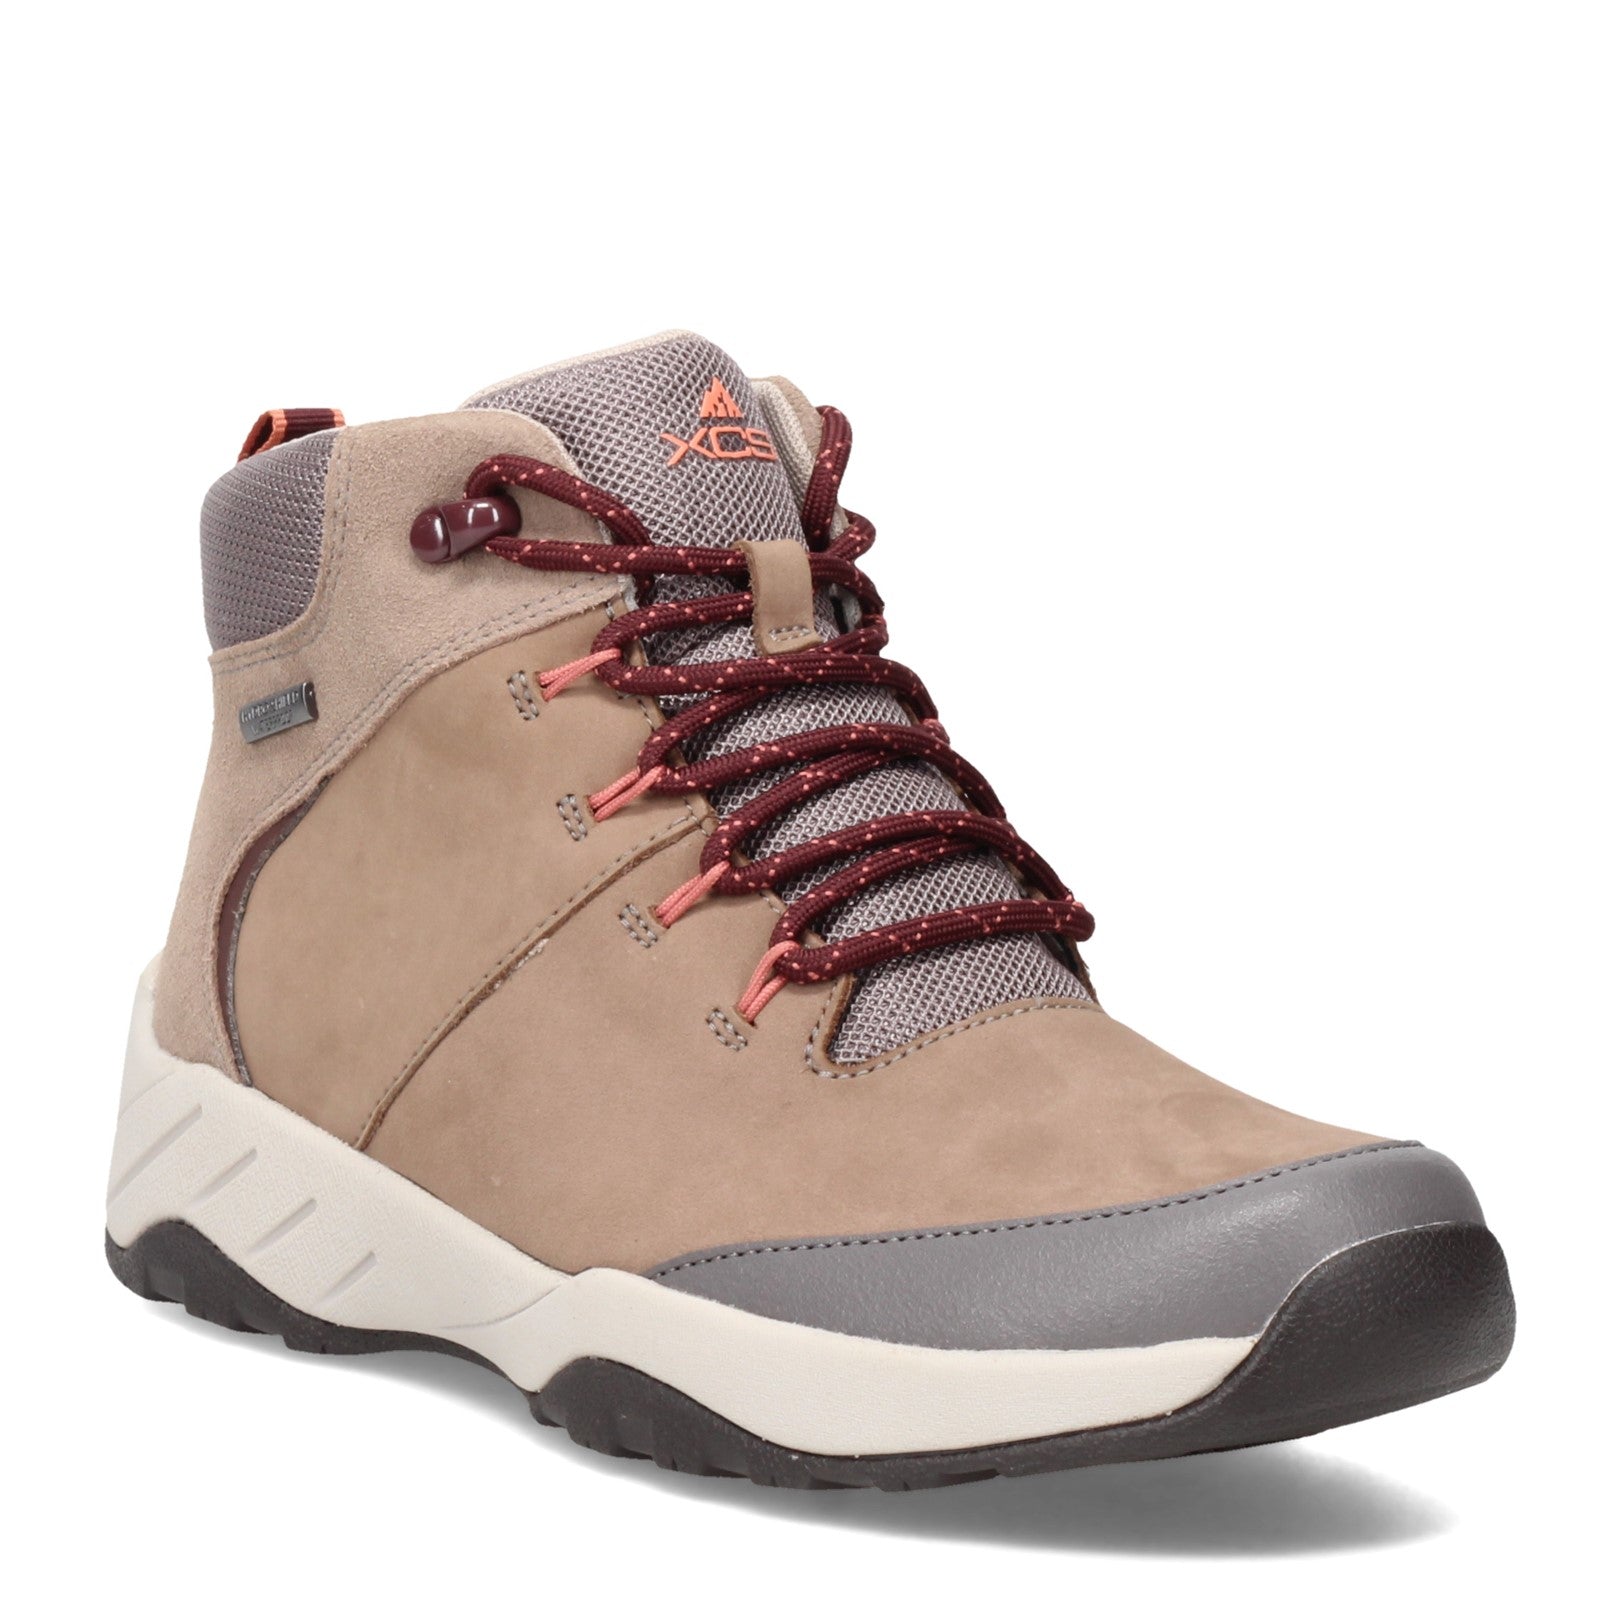 Stay Dry and Supported This Fall With These Rockport Waterproof